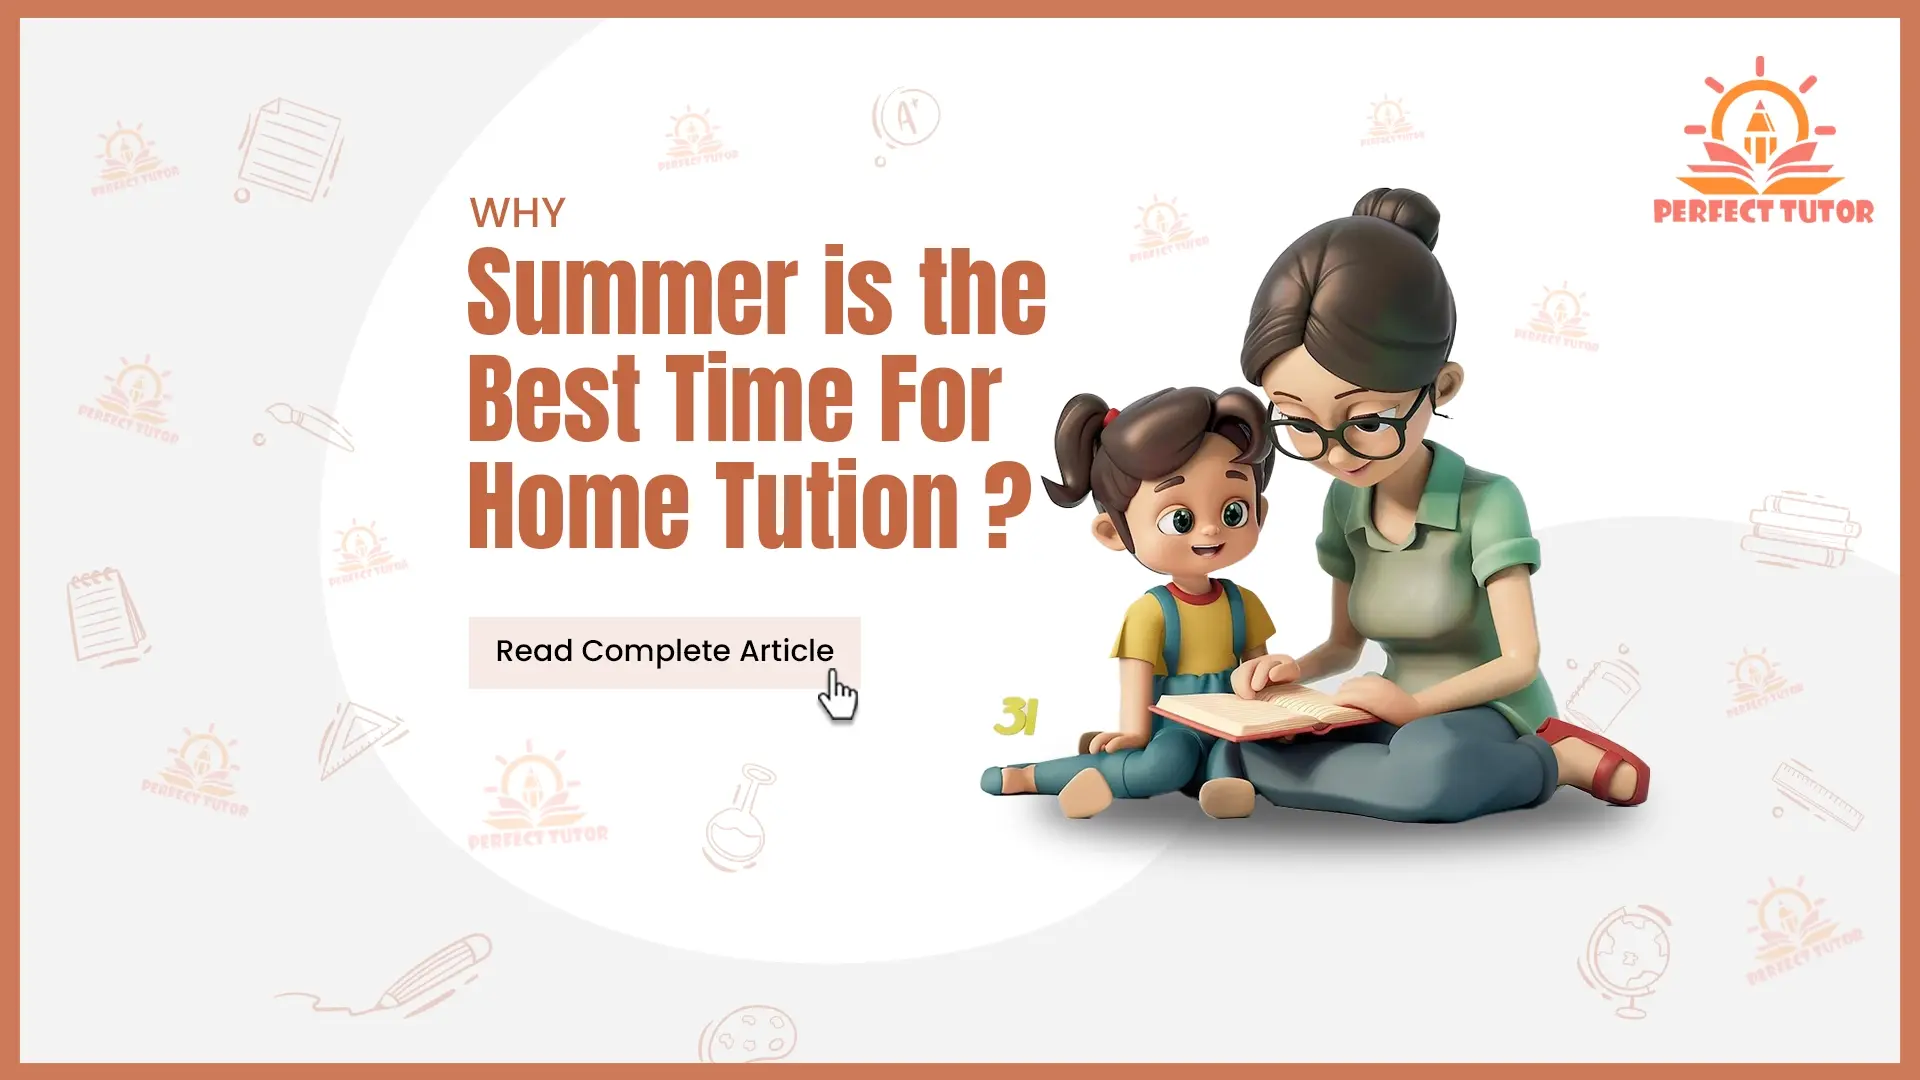 Why Summer Is the Best Time for Home Tuition?